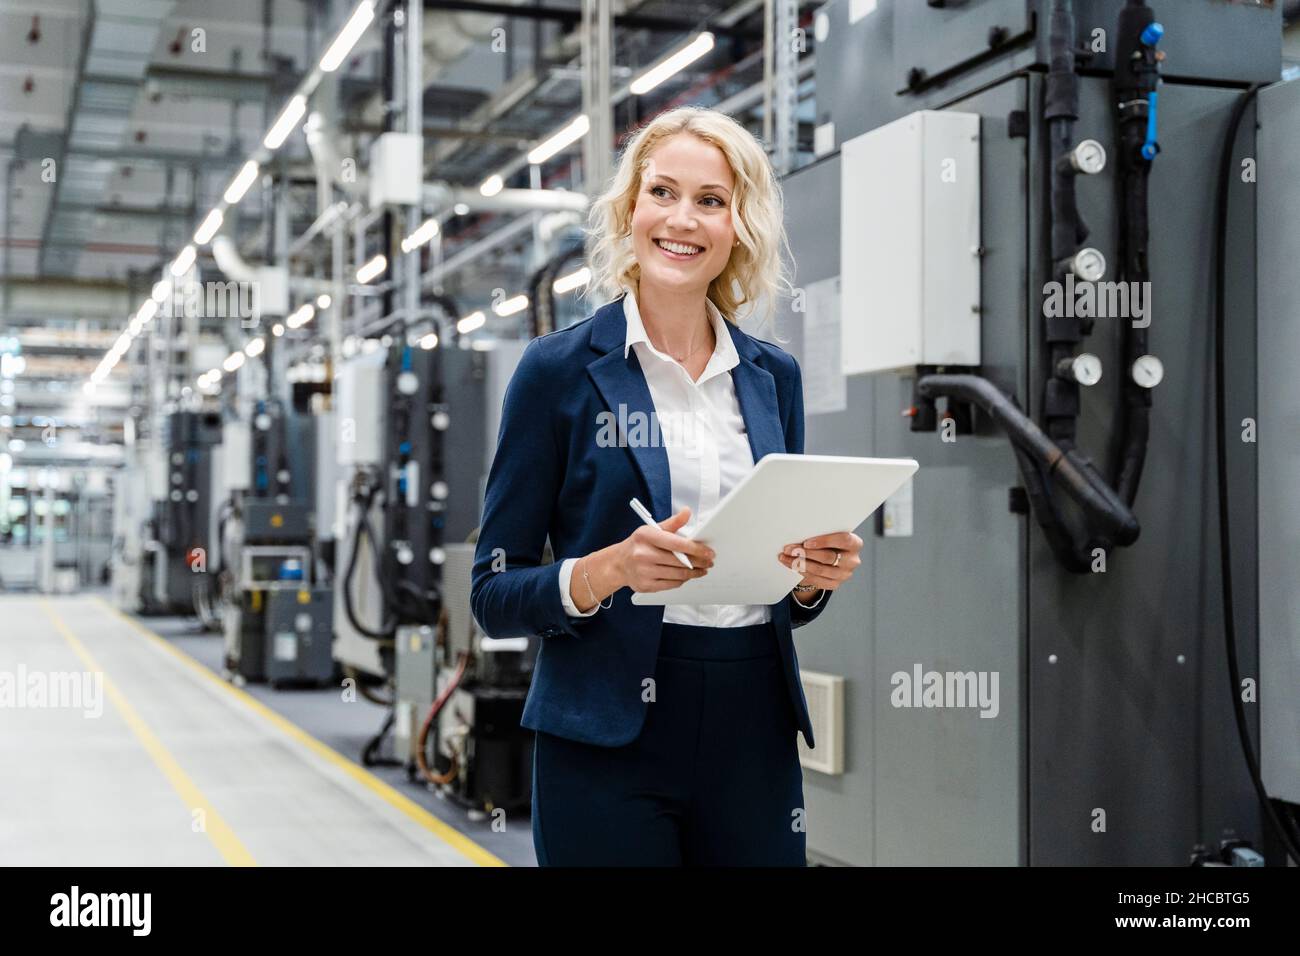 Smiling businesswoman with tablet PC at industrial equipment Stock Photo